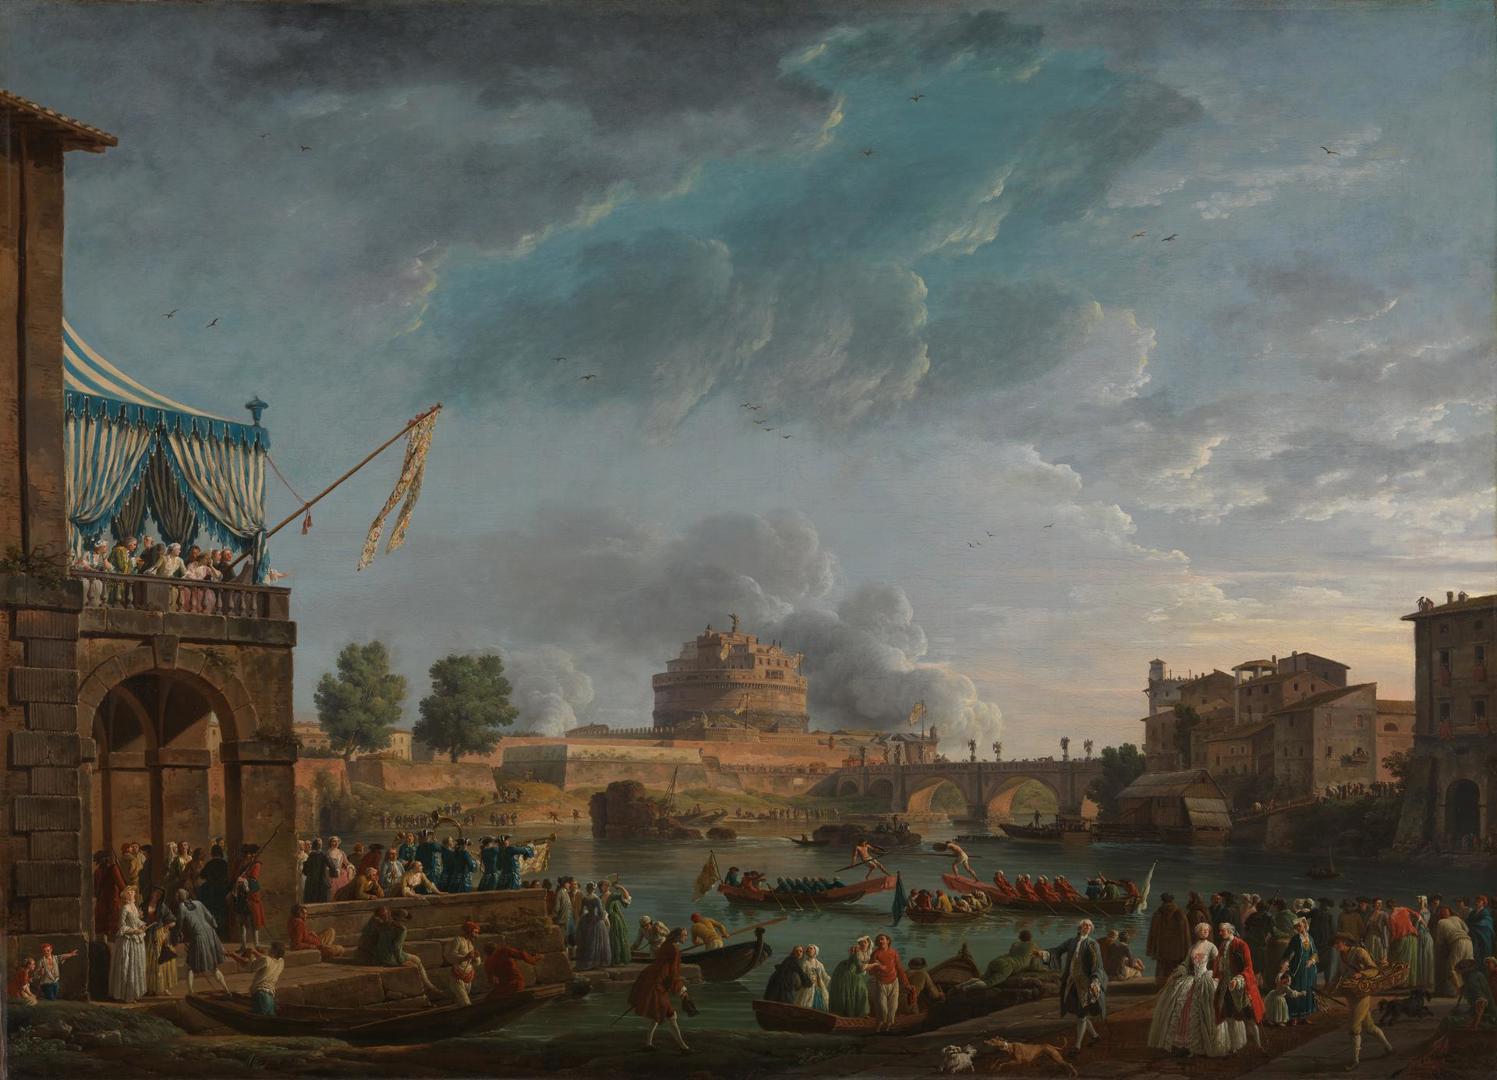 A Sporting Contest on the Tiber by Claude-Joseph Vernet